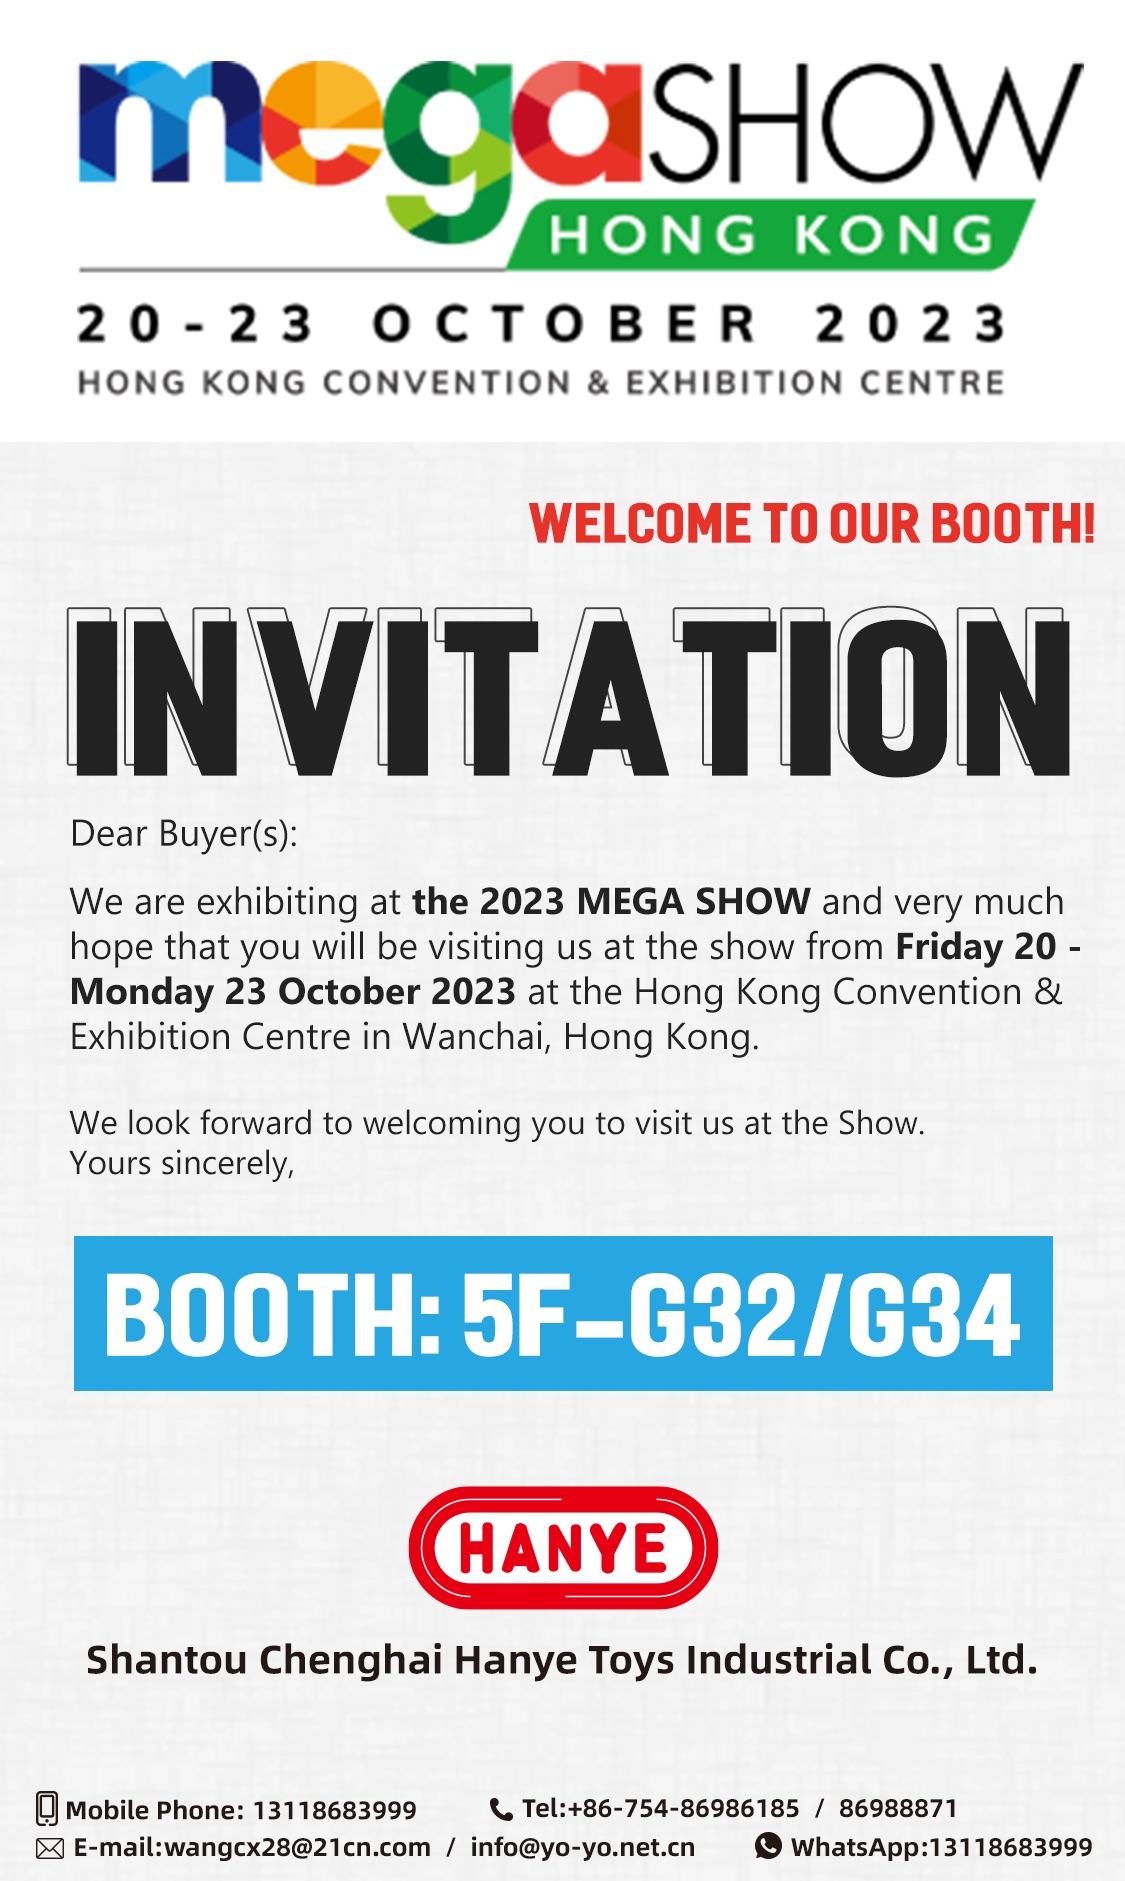 Welcome to meet us in HONG KONG MEGA SHOW next Month